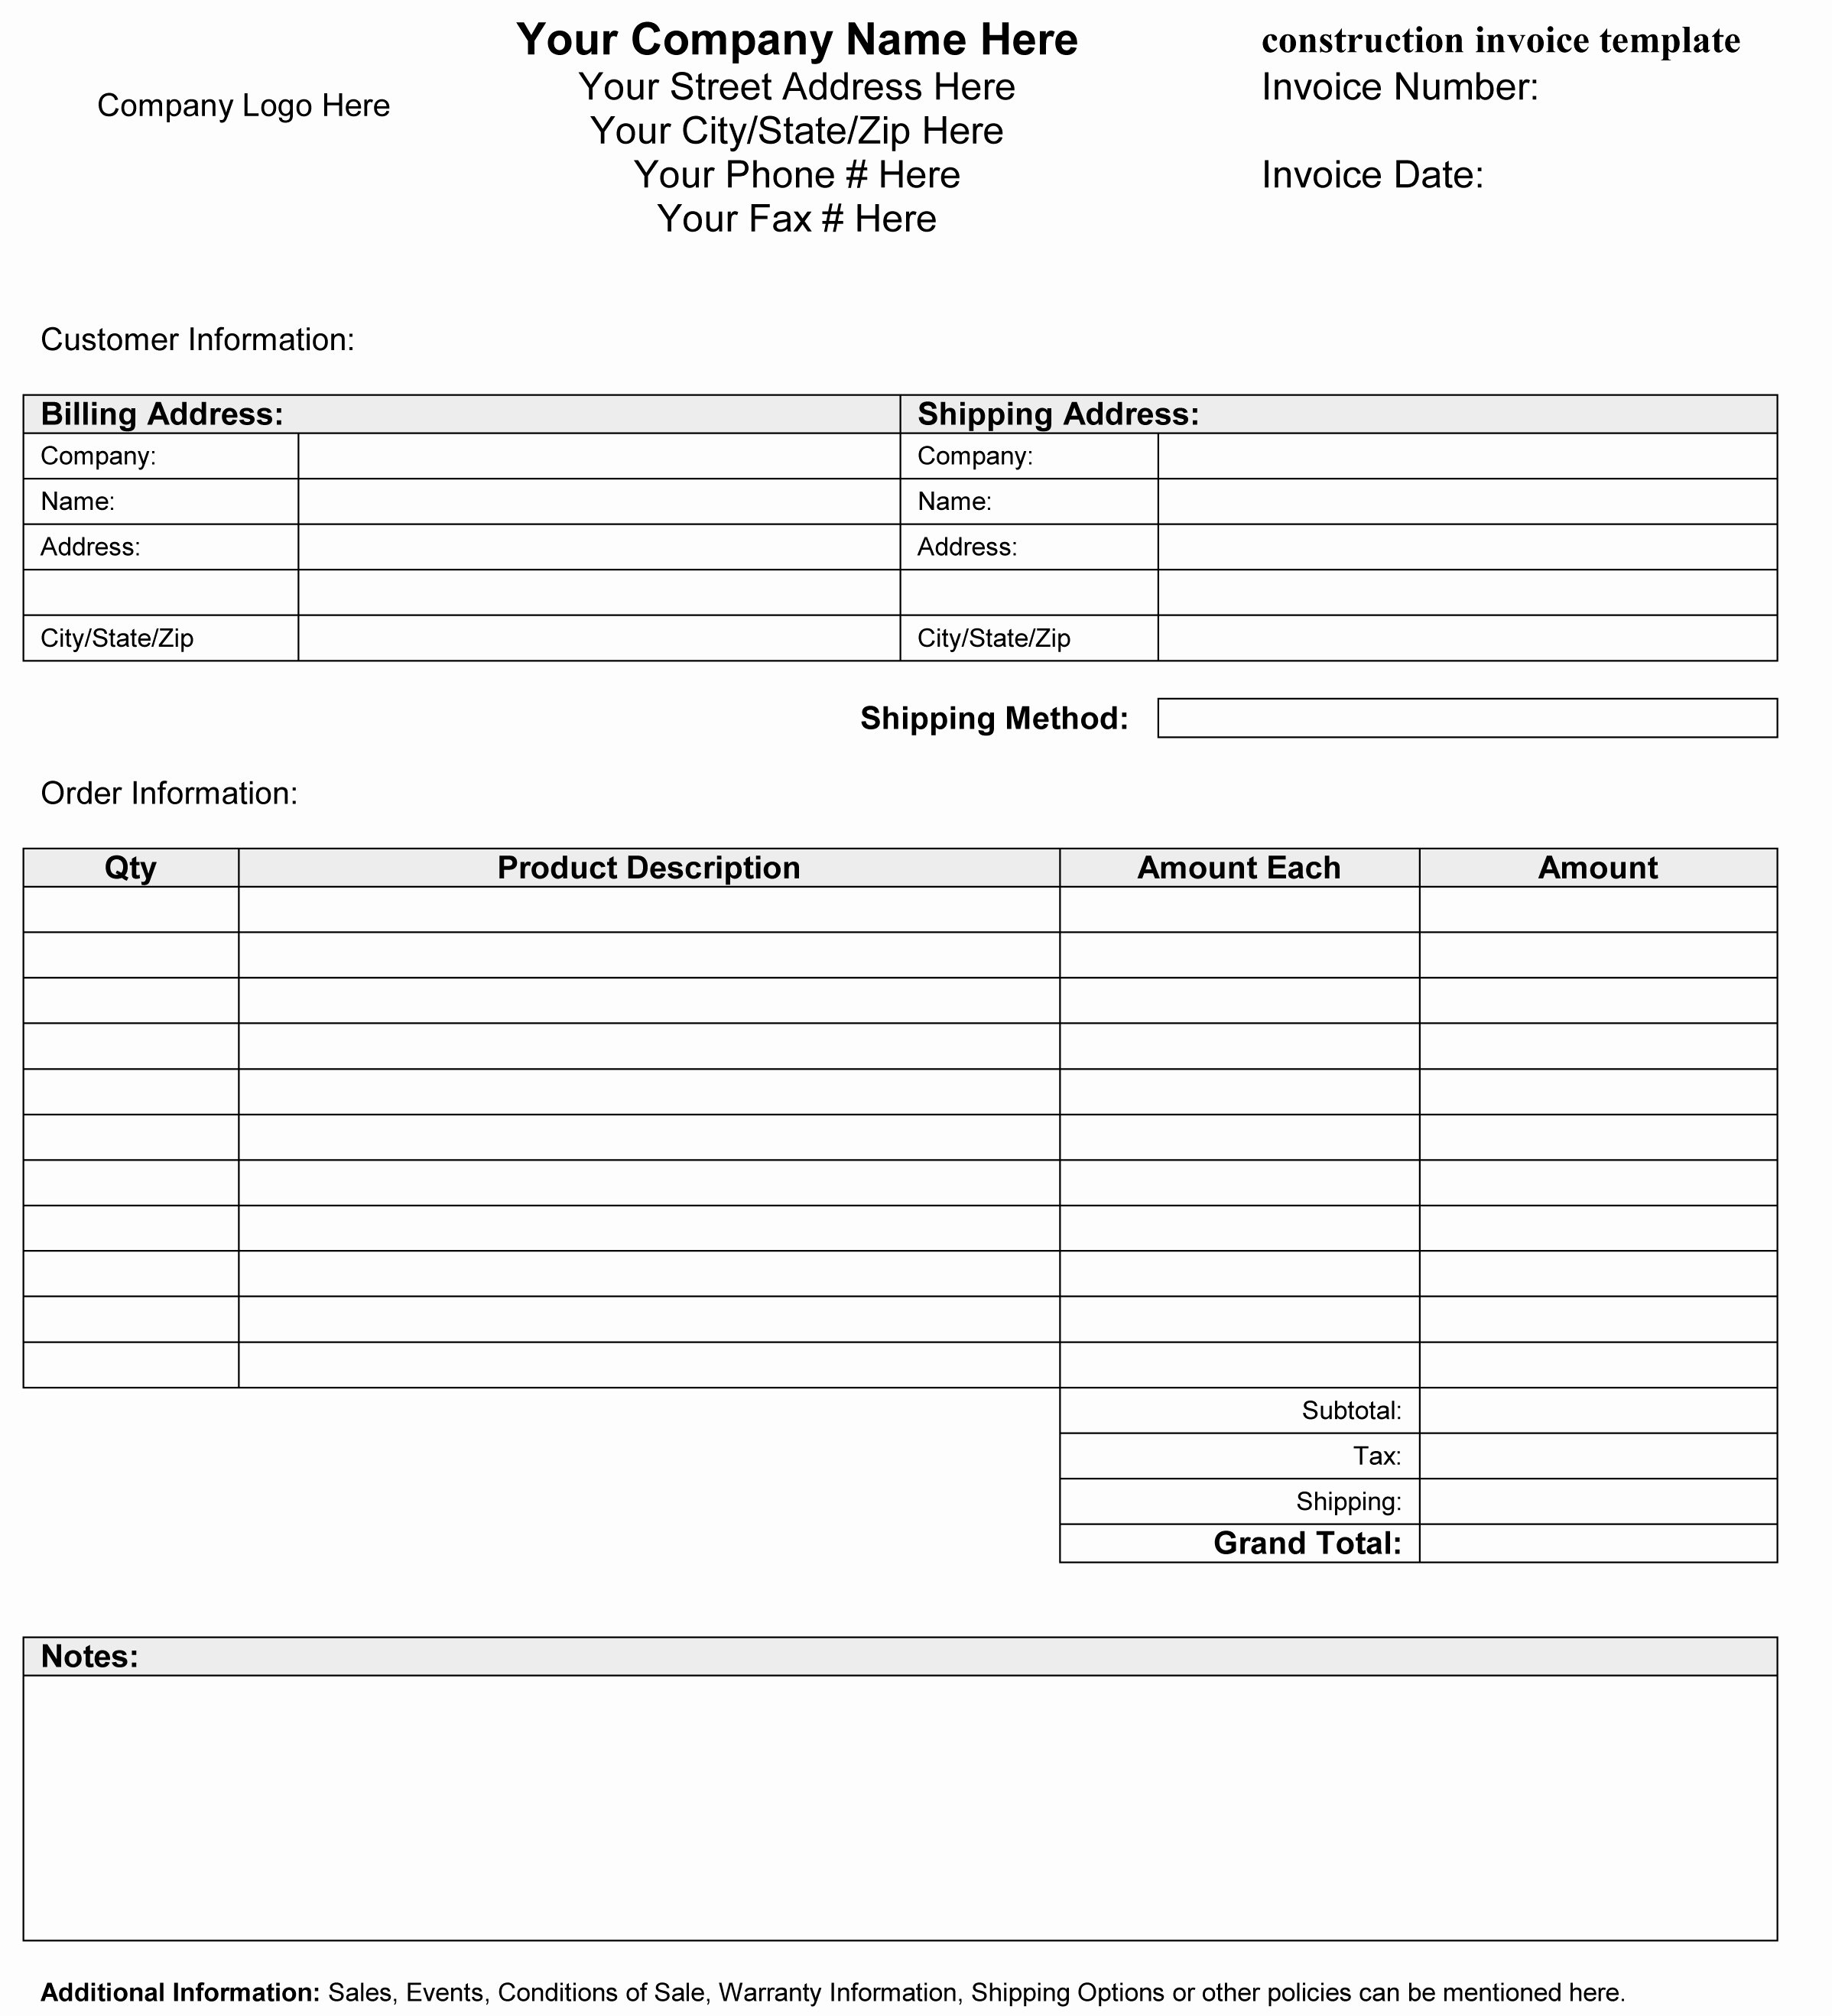 Contractor Invoice Template Excel Lovely Construction Invoice Template